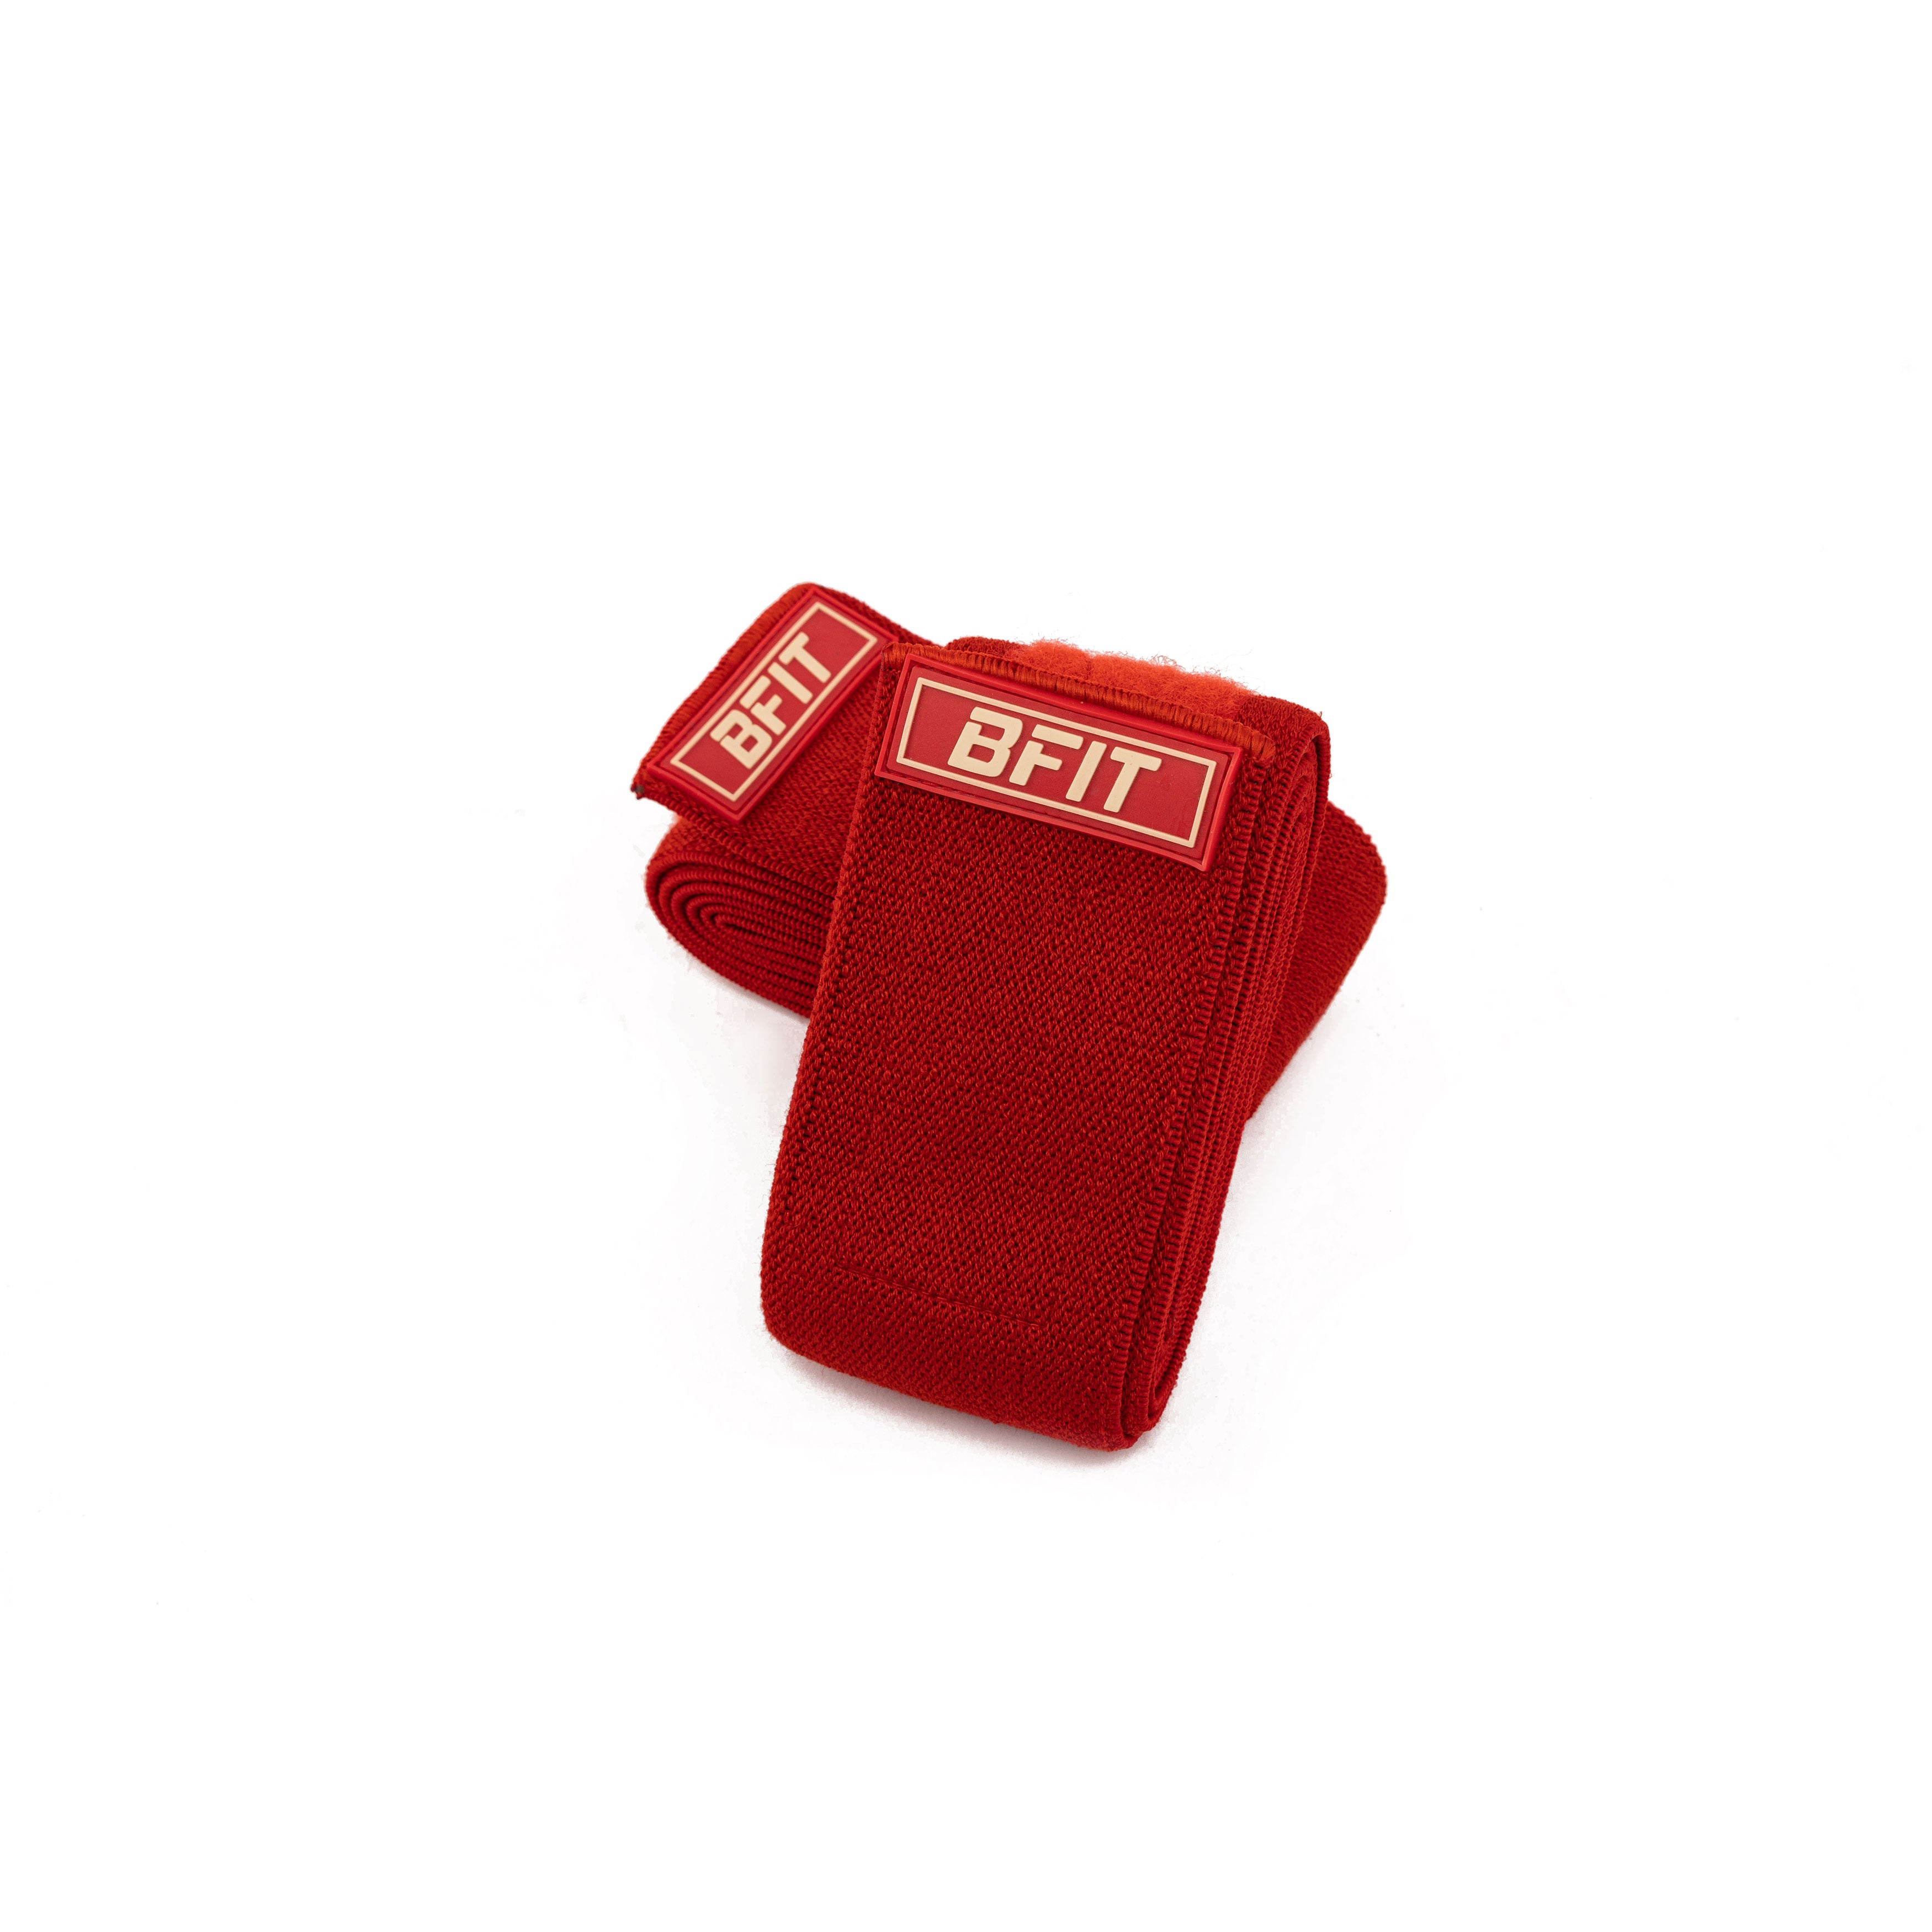 Knee Wrap Red